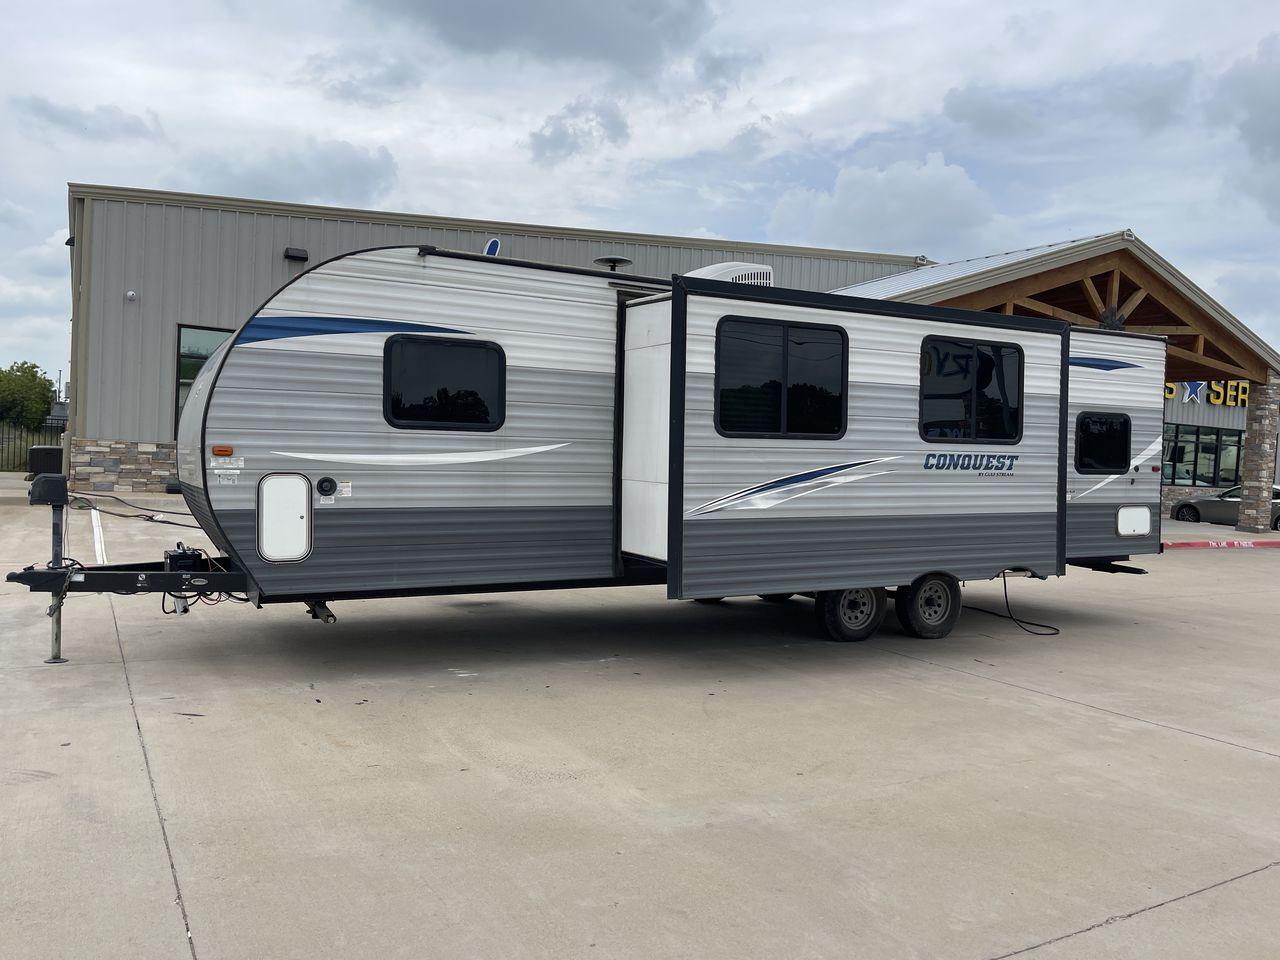 2019 GULF STREAM CONQUEST 274QB (1NL1G3226K1) , Length: 32.25 ft. | Dry Weight: 6,230 lbs. | Slides: 1 transmission, located at 4319 N Main St, Cleburne, TX, 76033, (817) 678-5133, 32.385960, -97.391212 - The 2019 Gulf Stream 274QB is a dual-axle steel-wheel set-up that measures 32.25 ft. in length. It has a dry weight of 6,230 lbs. and a payload capacity of 1,918 lbs. It has automatic heating and cooling rated at 16,000 and 13,500 BTUs, respectively. It is also equipped with one power slide and a po - Photo #25